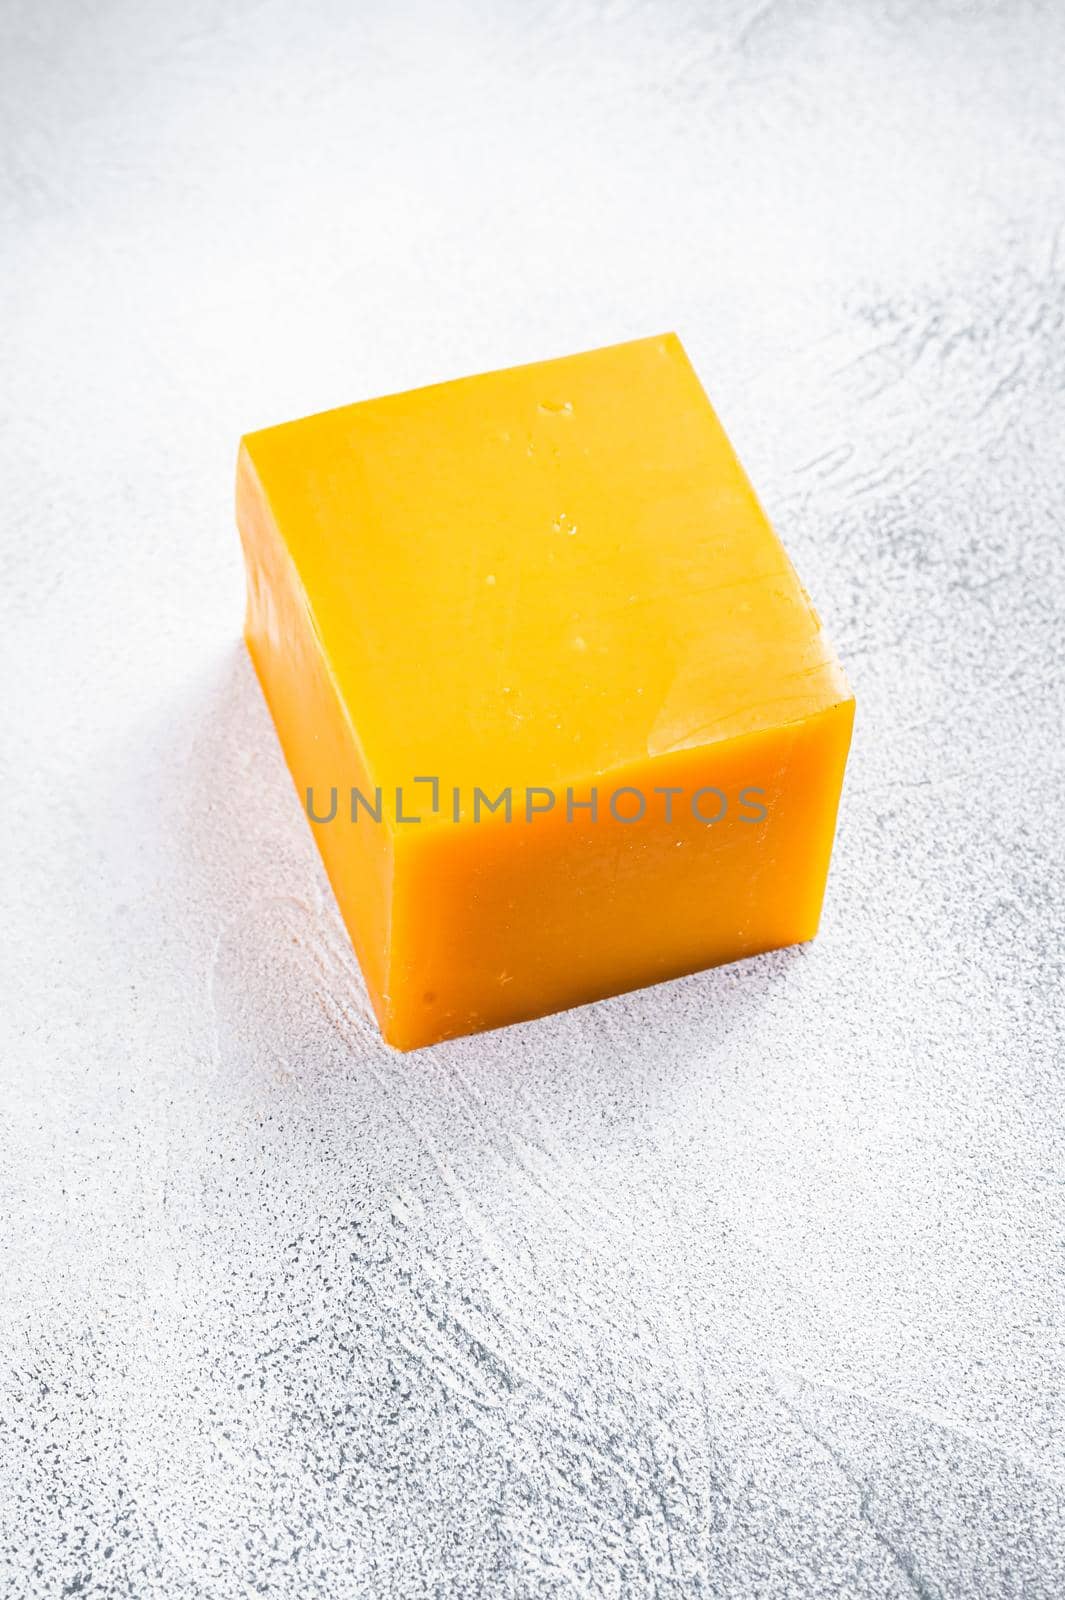 Cheddar Cheese block on a kitchen table. White background. Top view by Composter